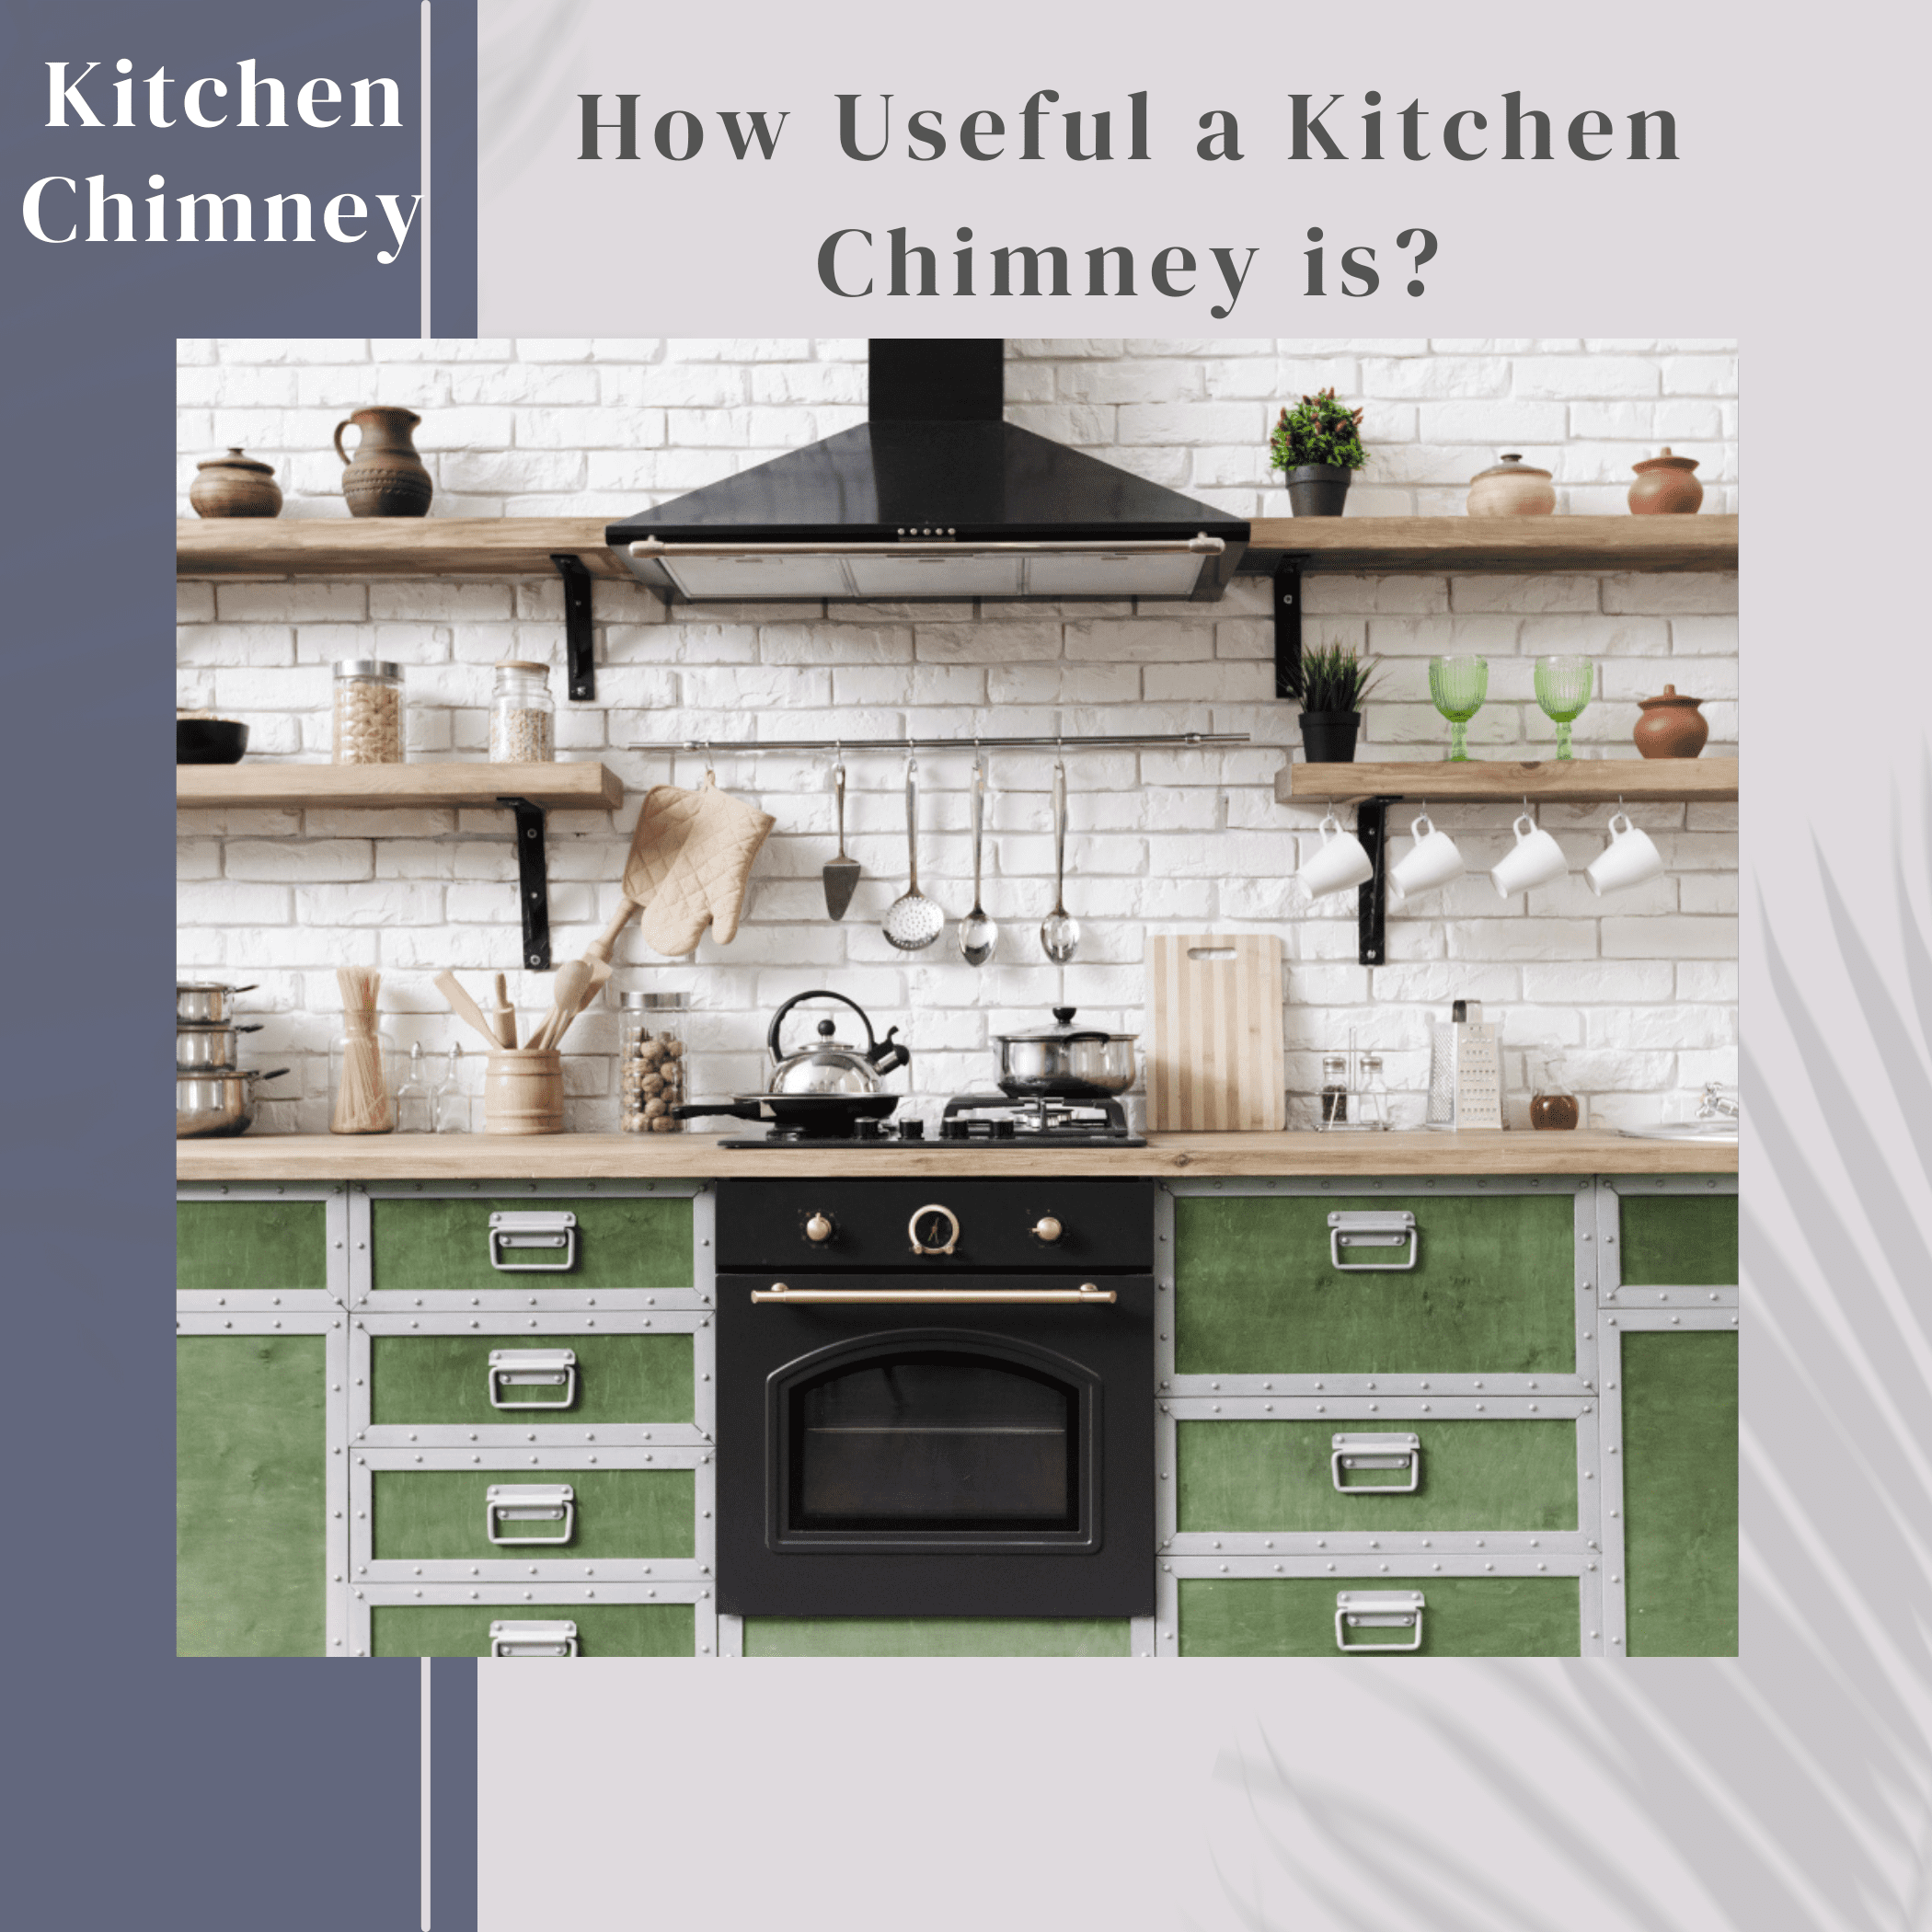 11 Reasons: How useful a Kitchen Chimney is?